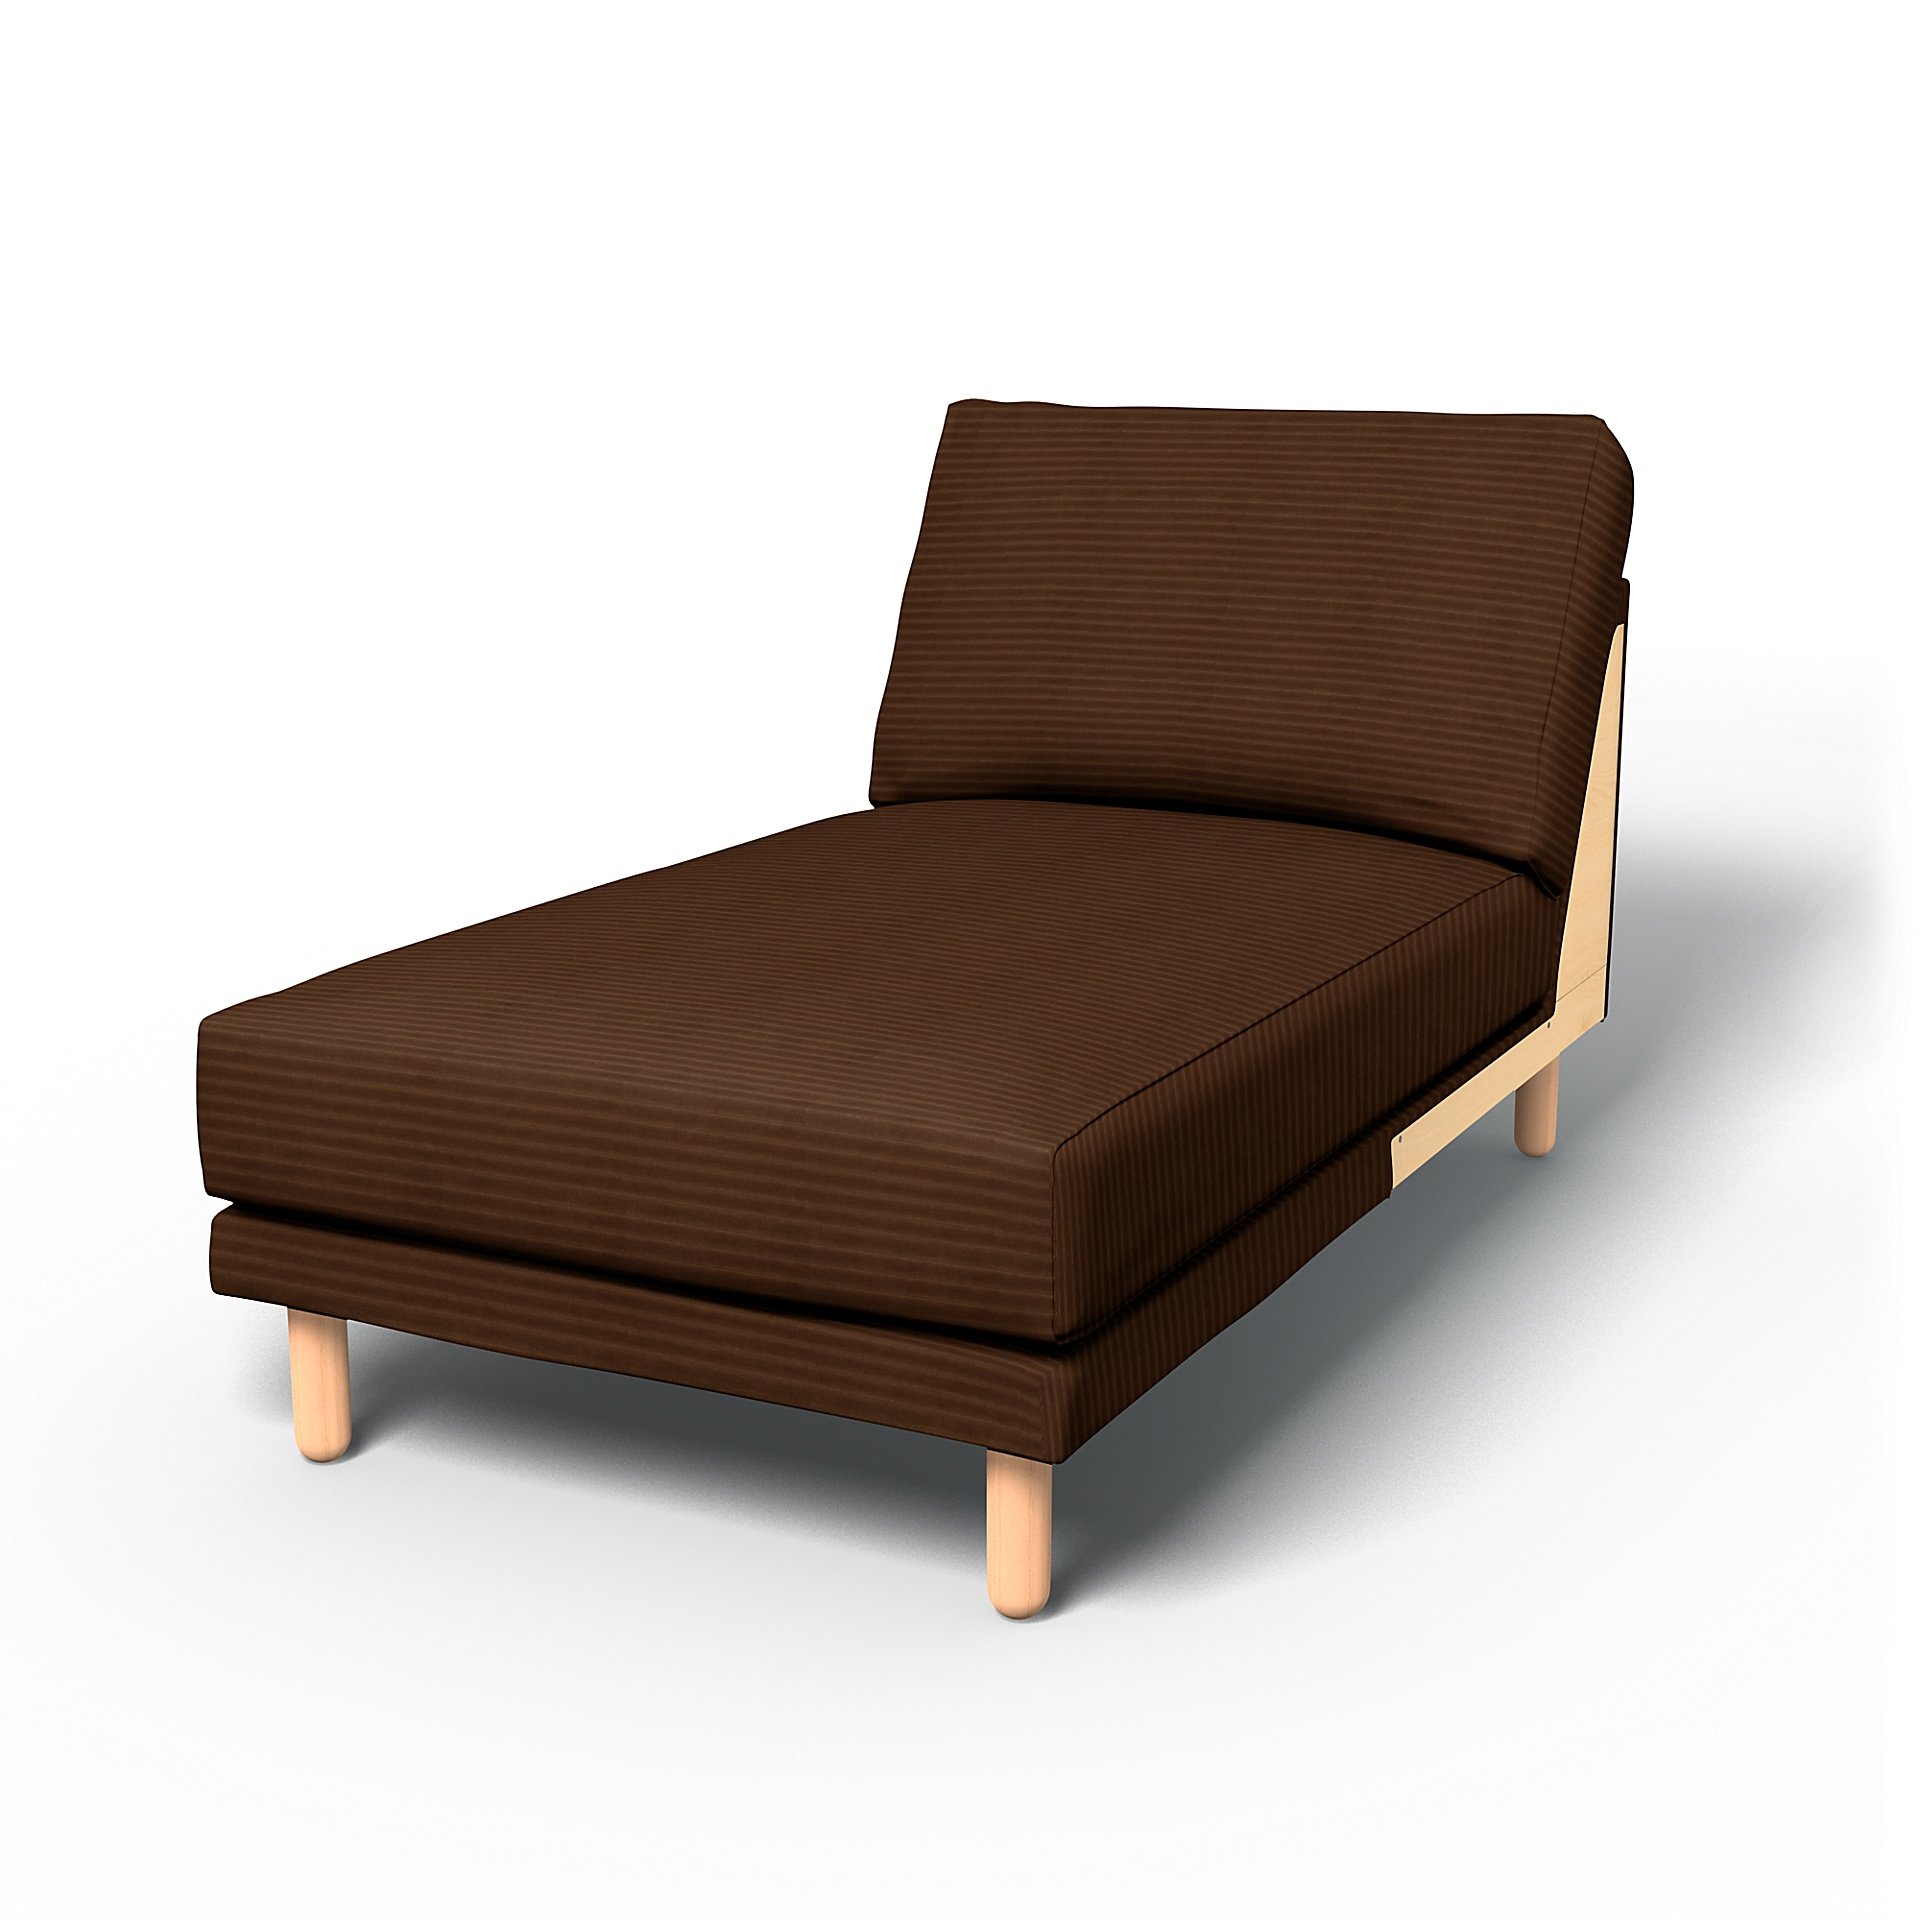 IKEA - Norsborg Chaise Longue Add-on Unit Cover, Chocolate Brown, Corduroy - Bemz